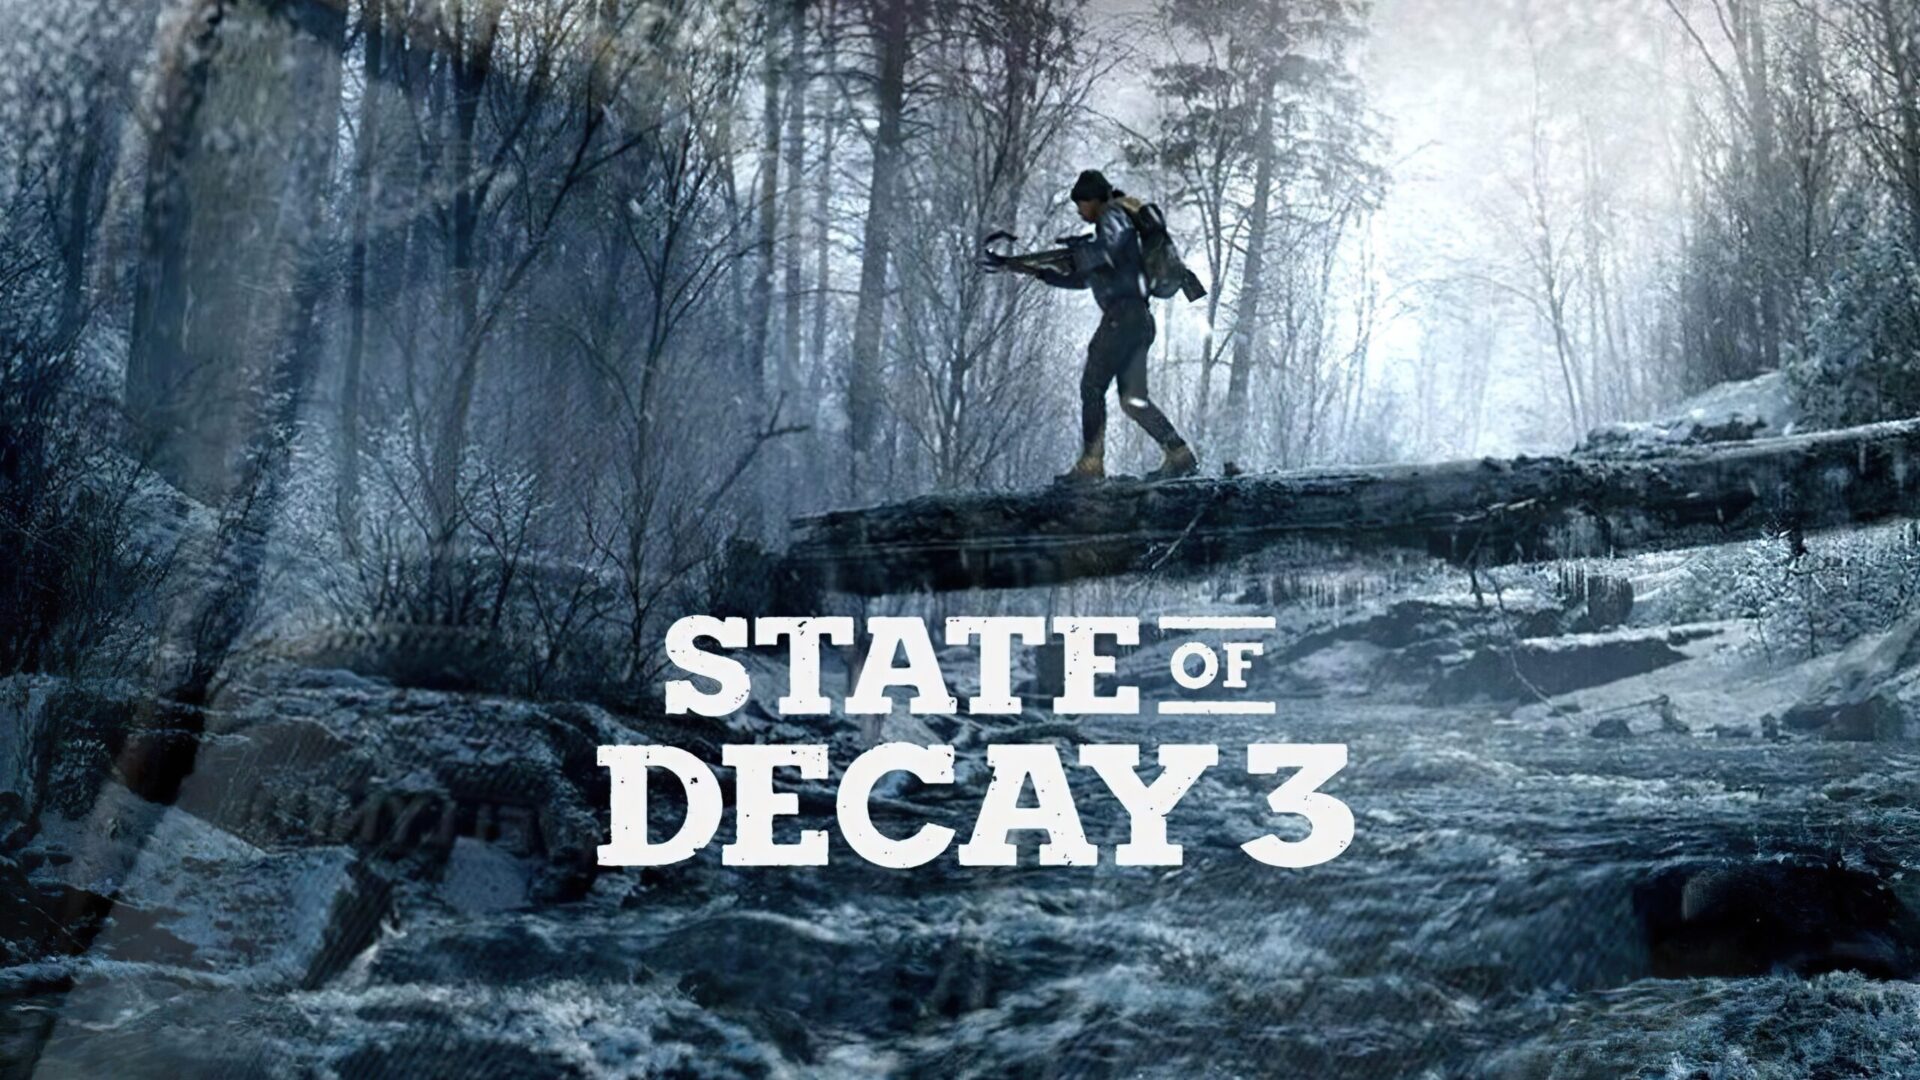 STATE OF DECAY 3 Trailer (2020) 